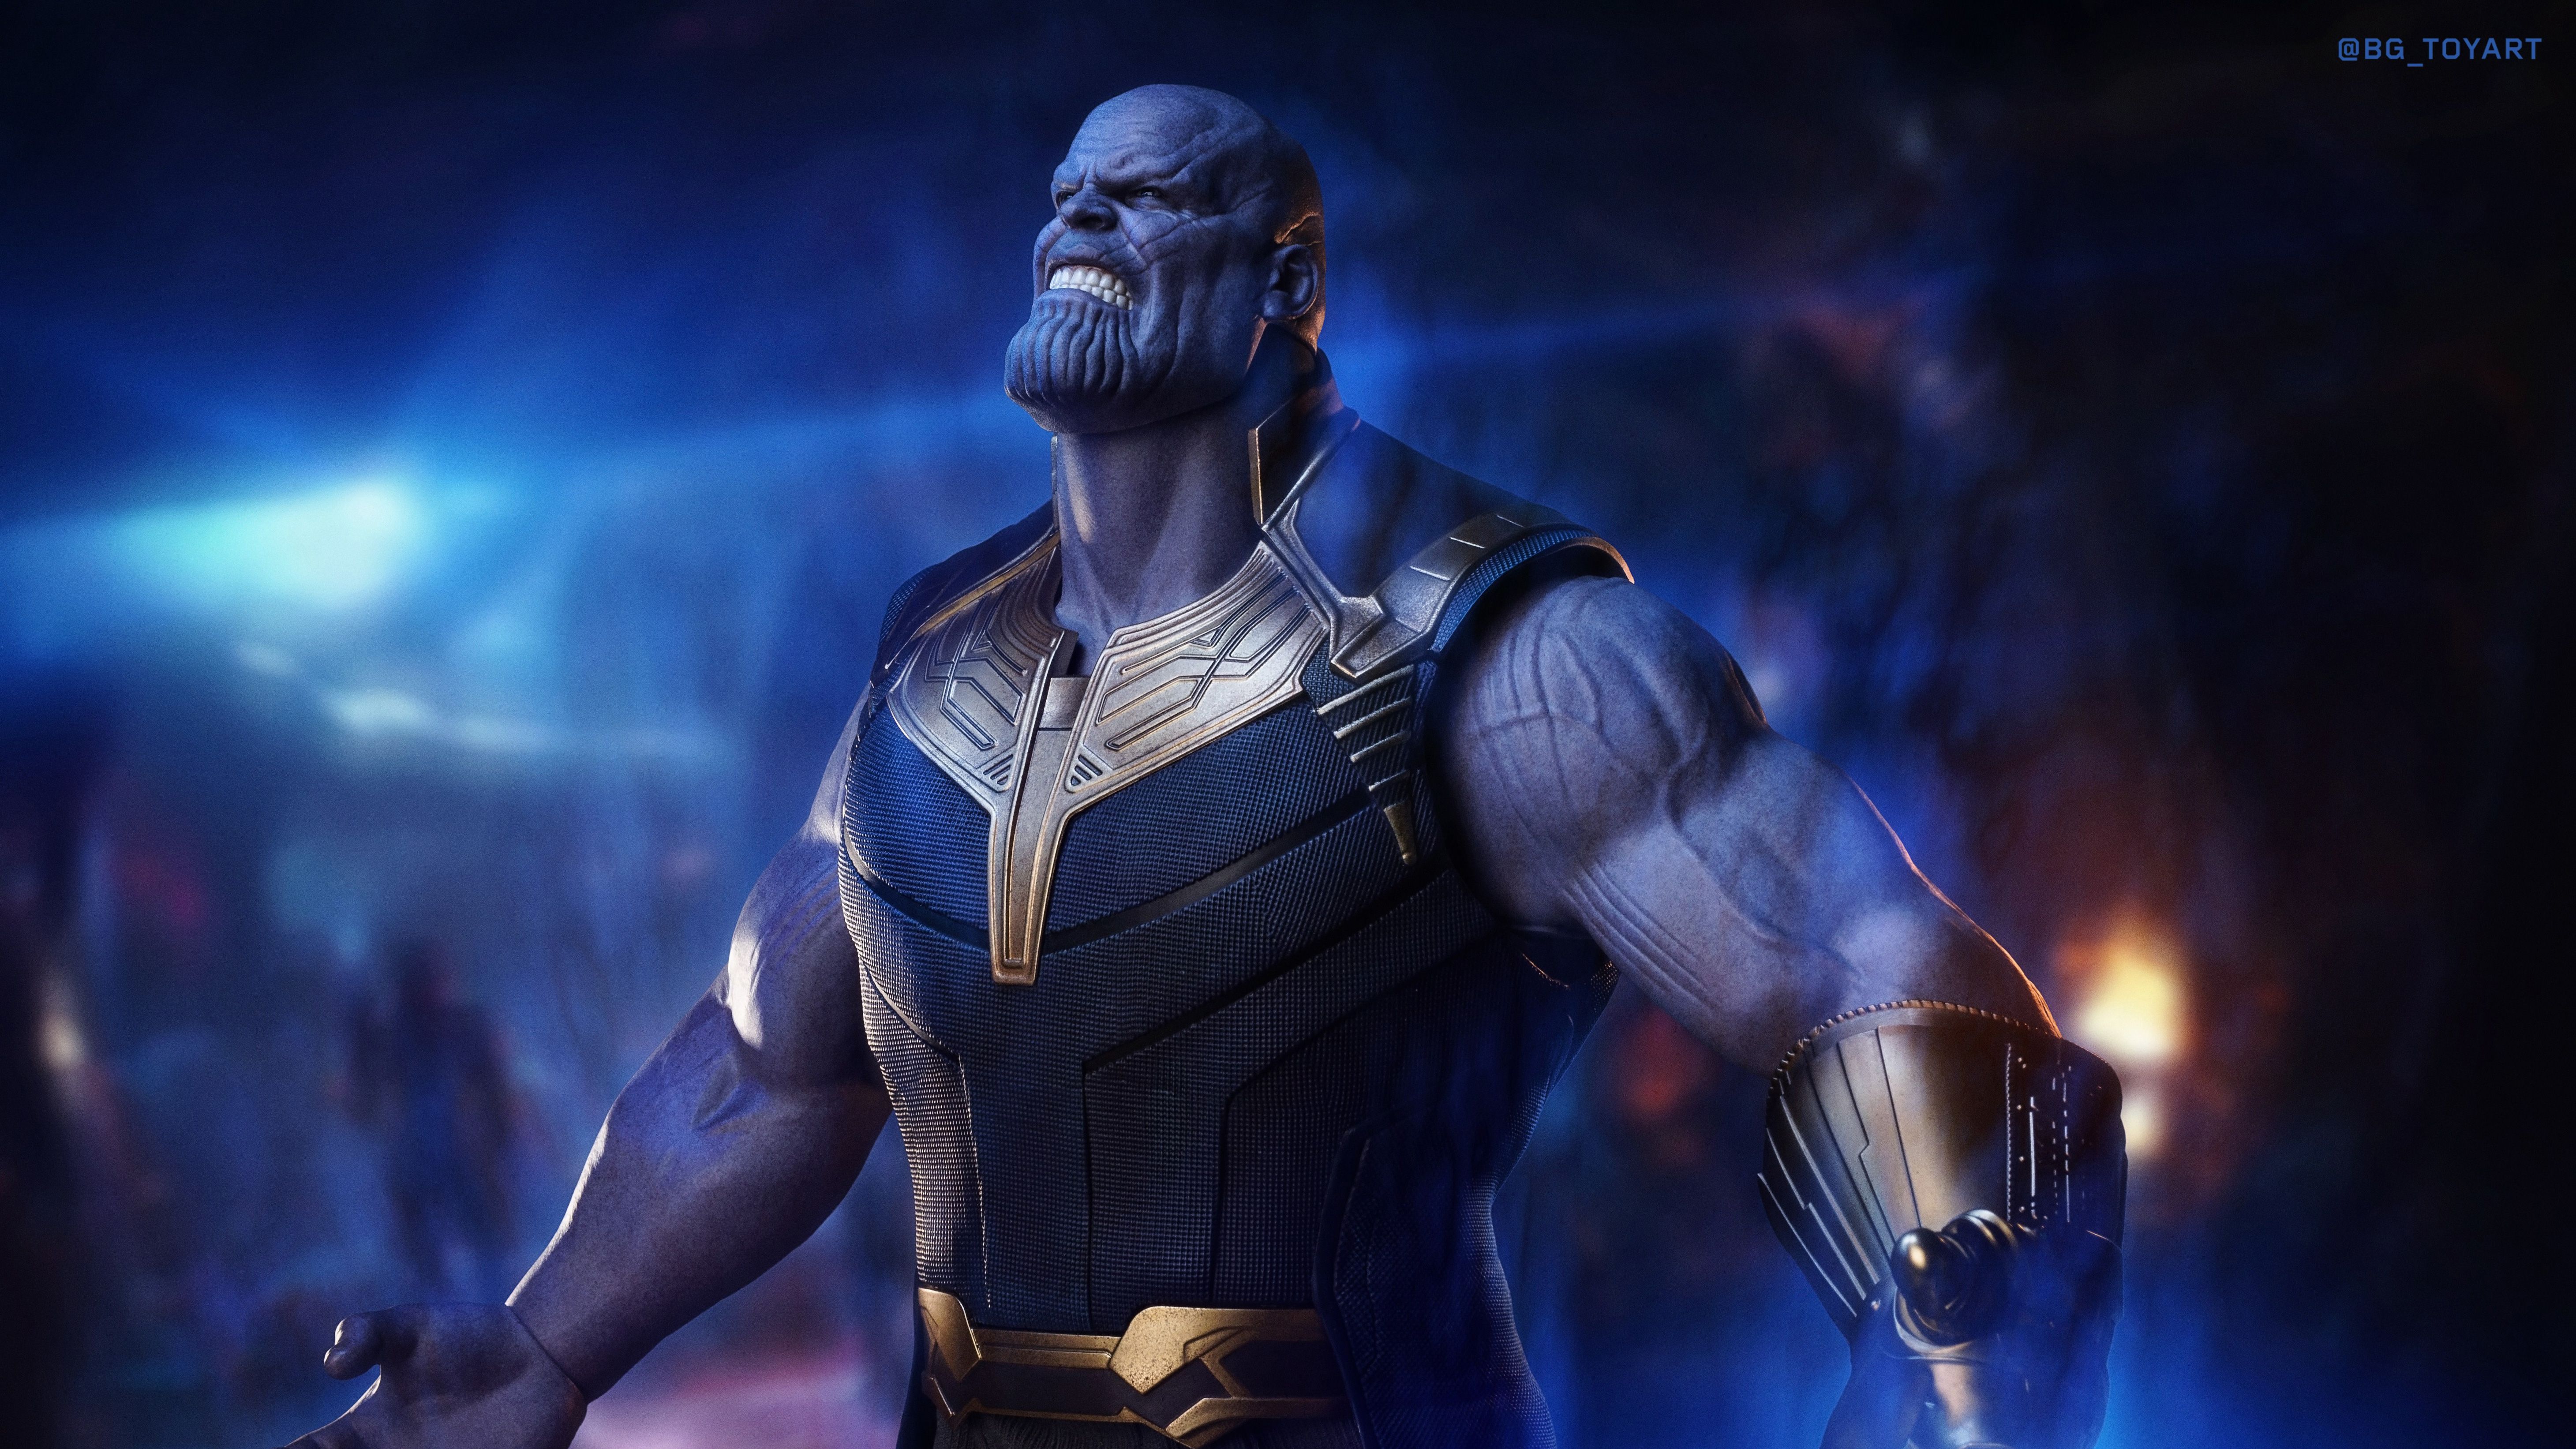 Thanos in Infinity War 2560x1080 Resolution Wallpaper, HD Movies 4K Wallpaper, Image, Photo and Background